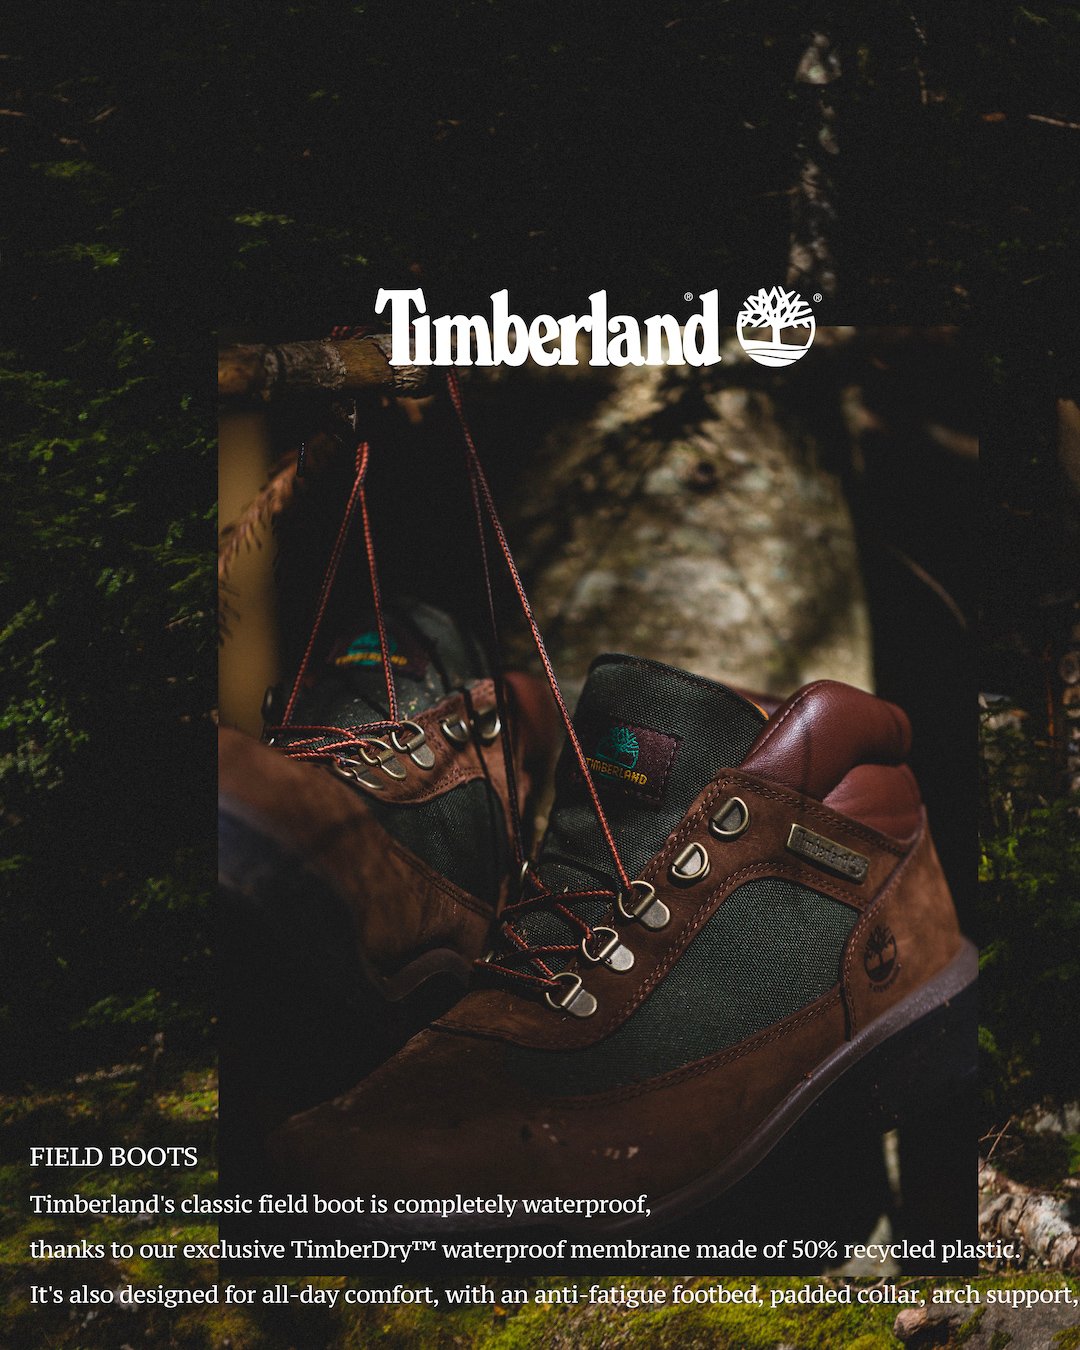 Timberland BEAMS FIELD BOOTS 29.5cm ビーブロ 【18％OFF】 51.0%OFF